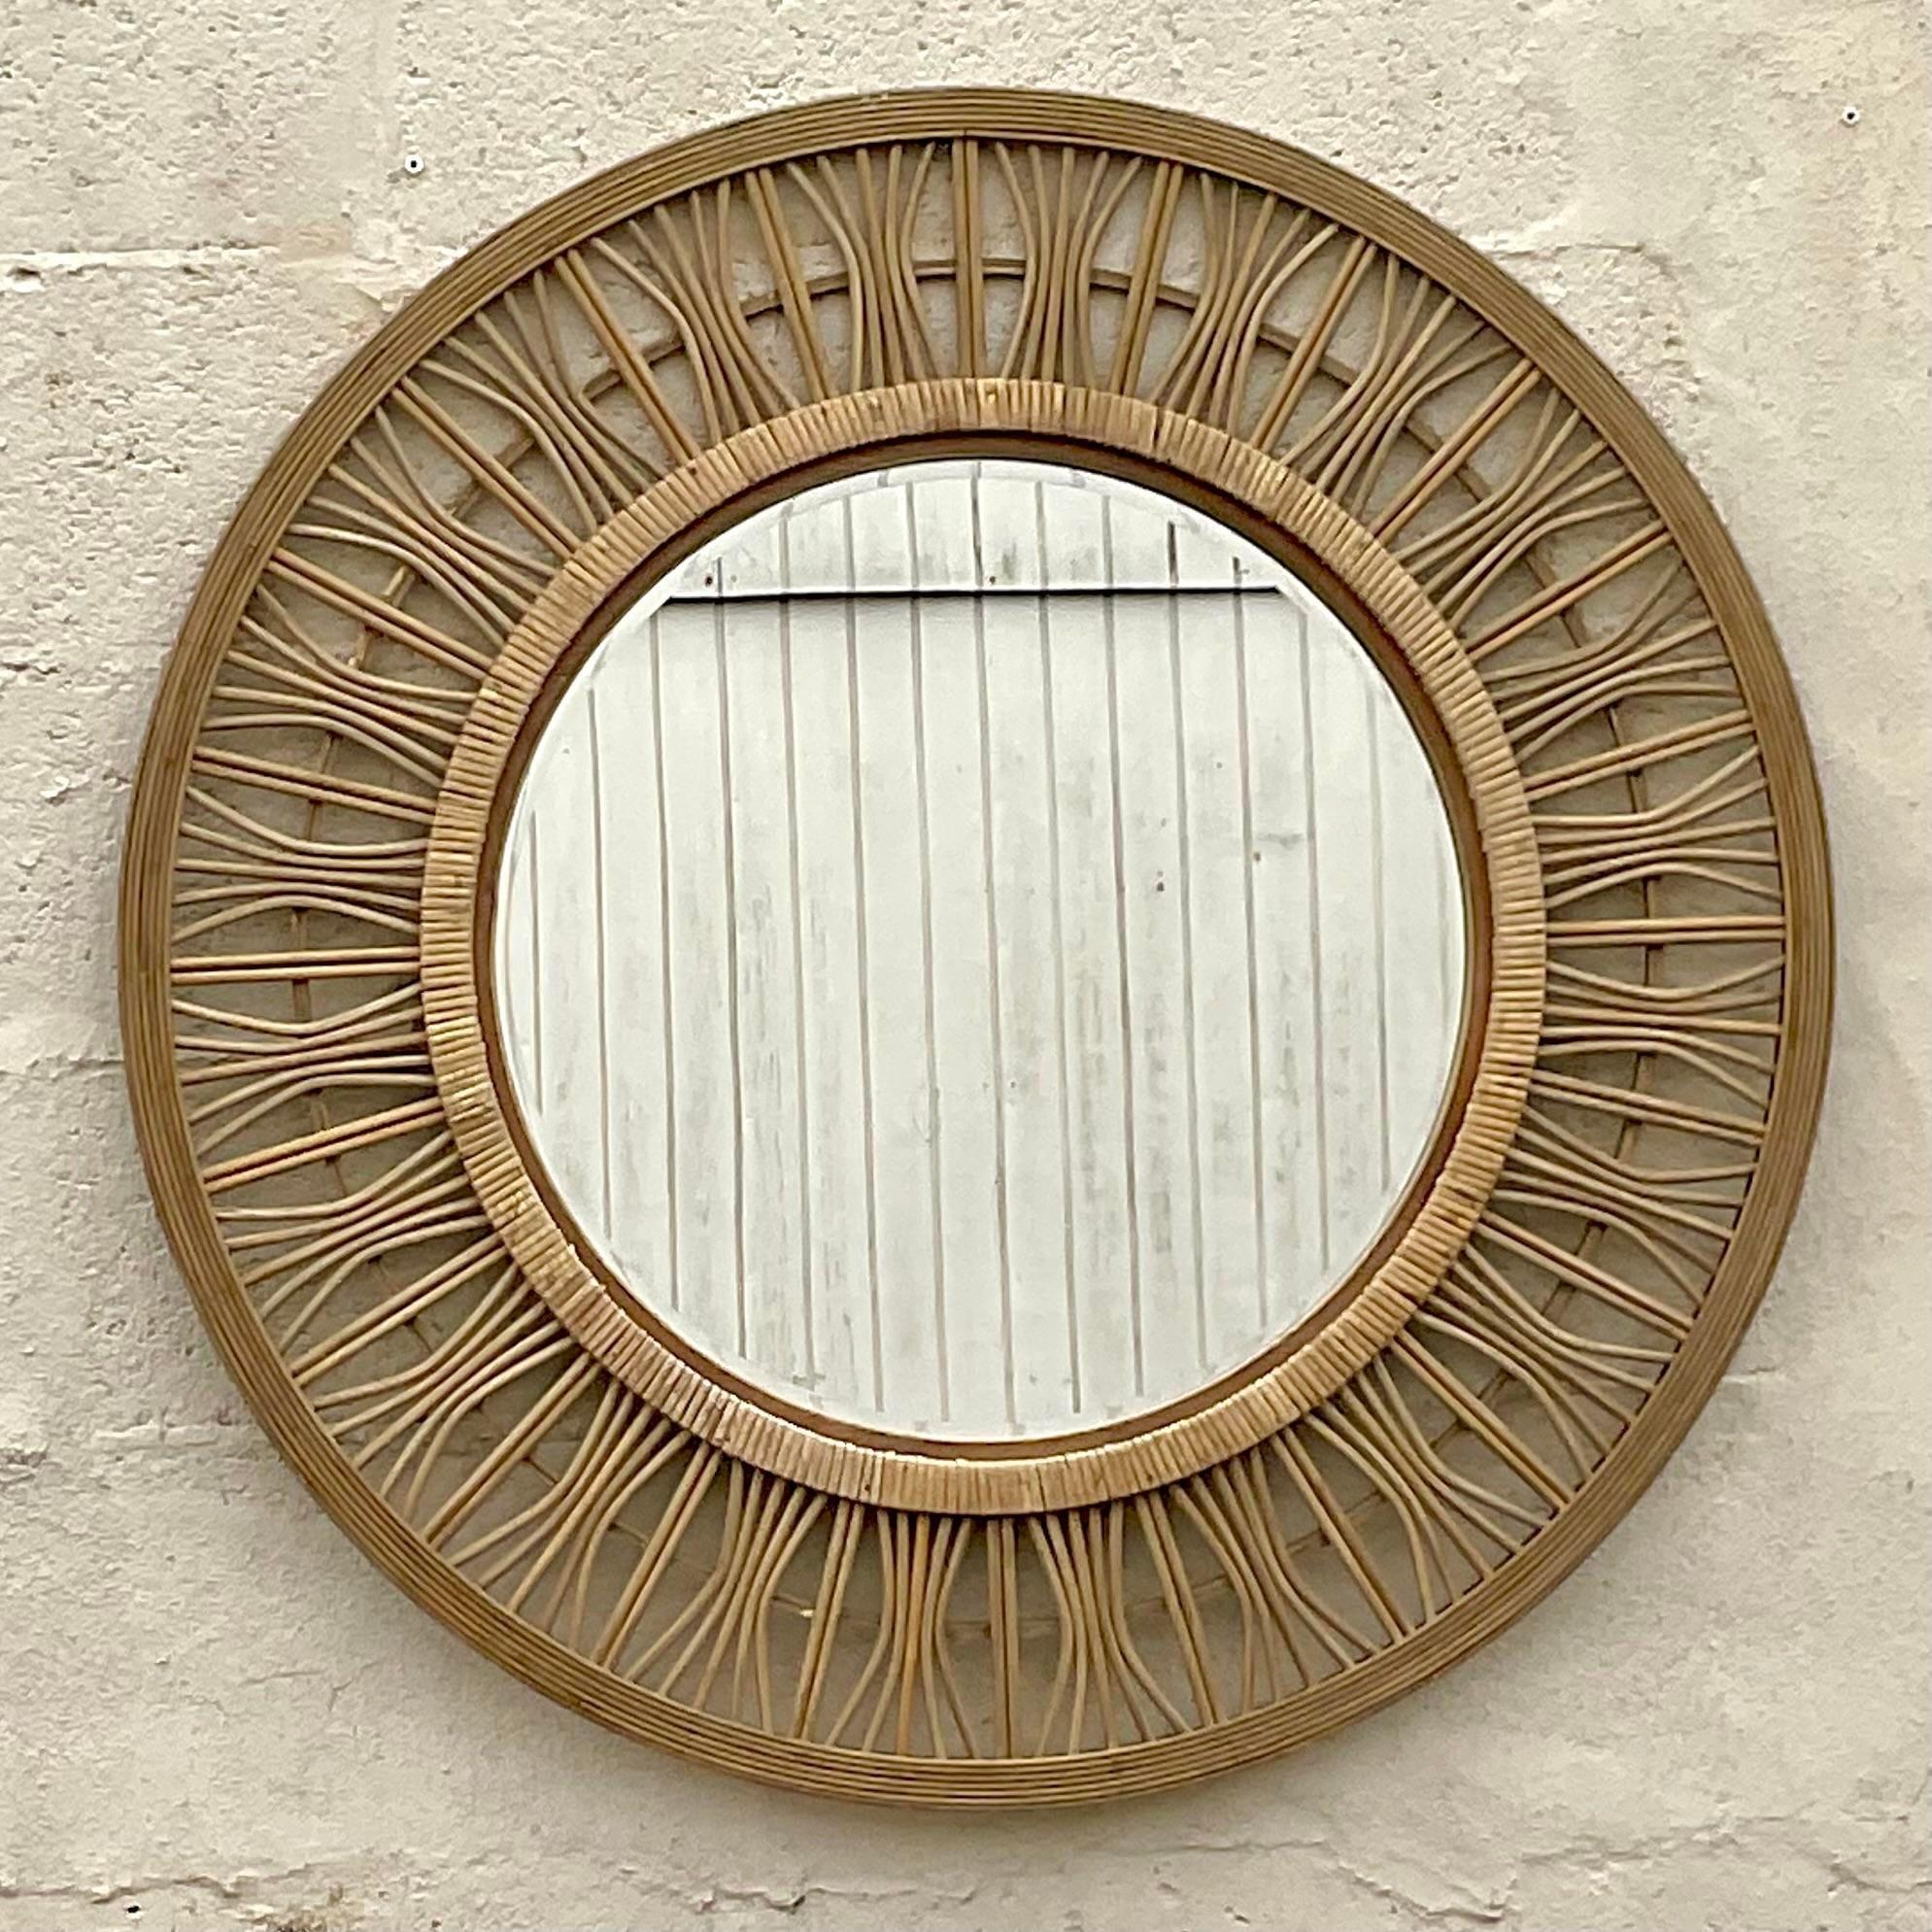 A fabulous vintage Coastal wall mirror. A beautiful spoke design with wrapped rattan inserts. Acquired from a Palm Beach estate.